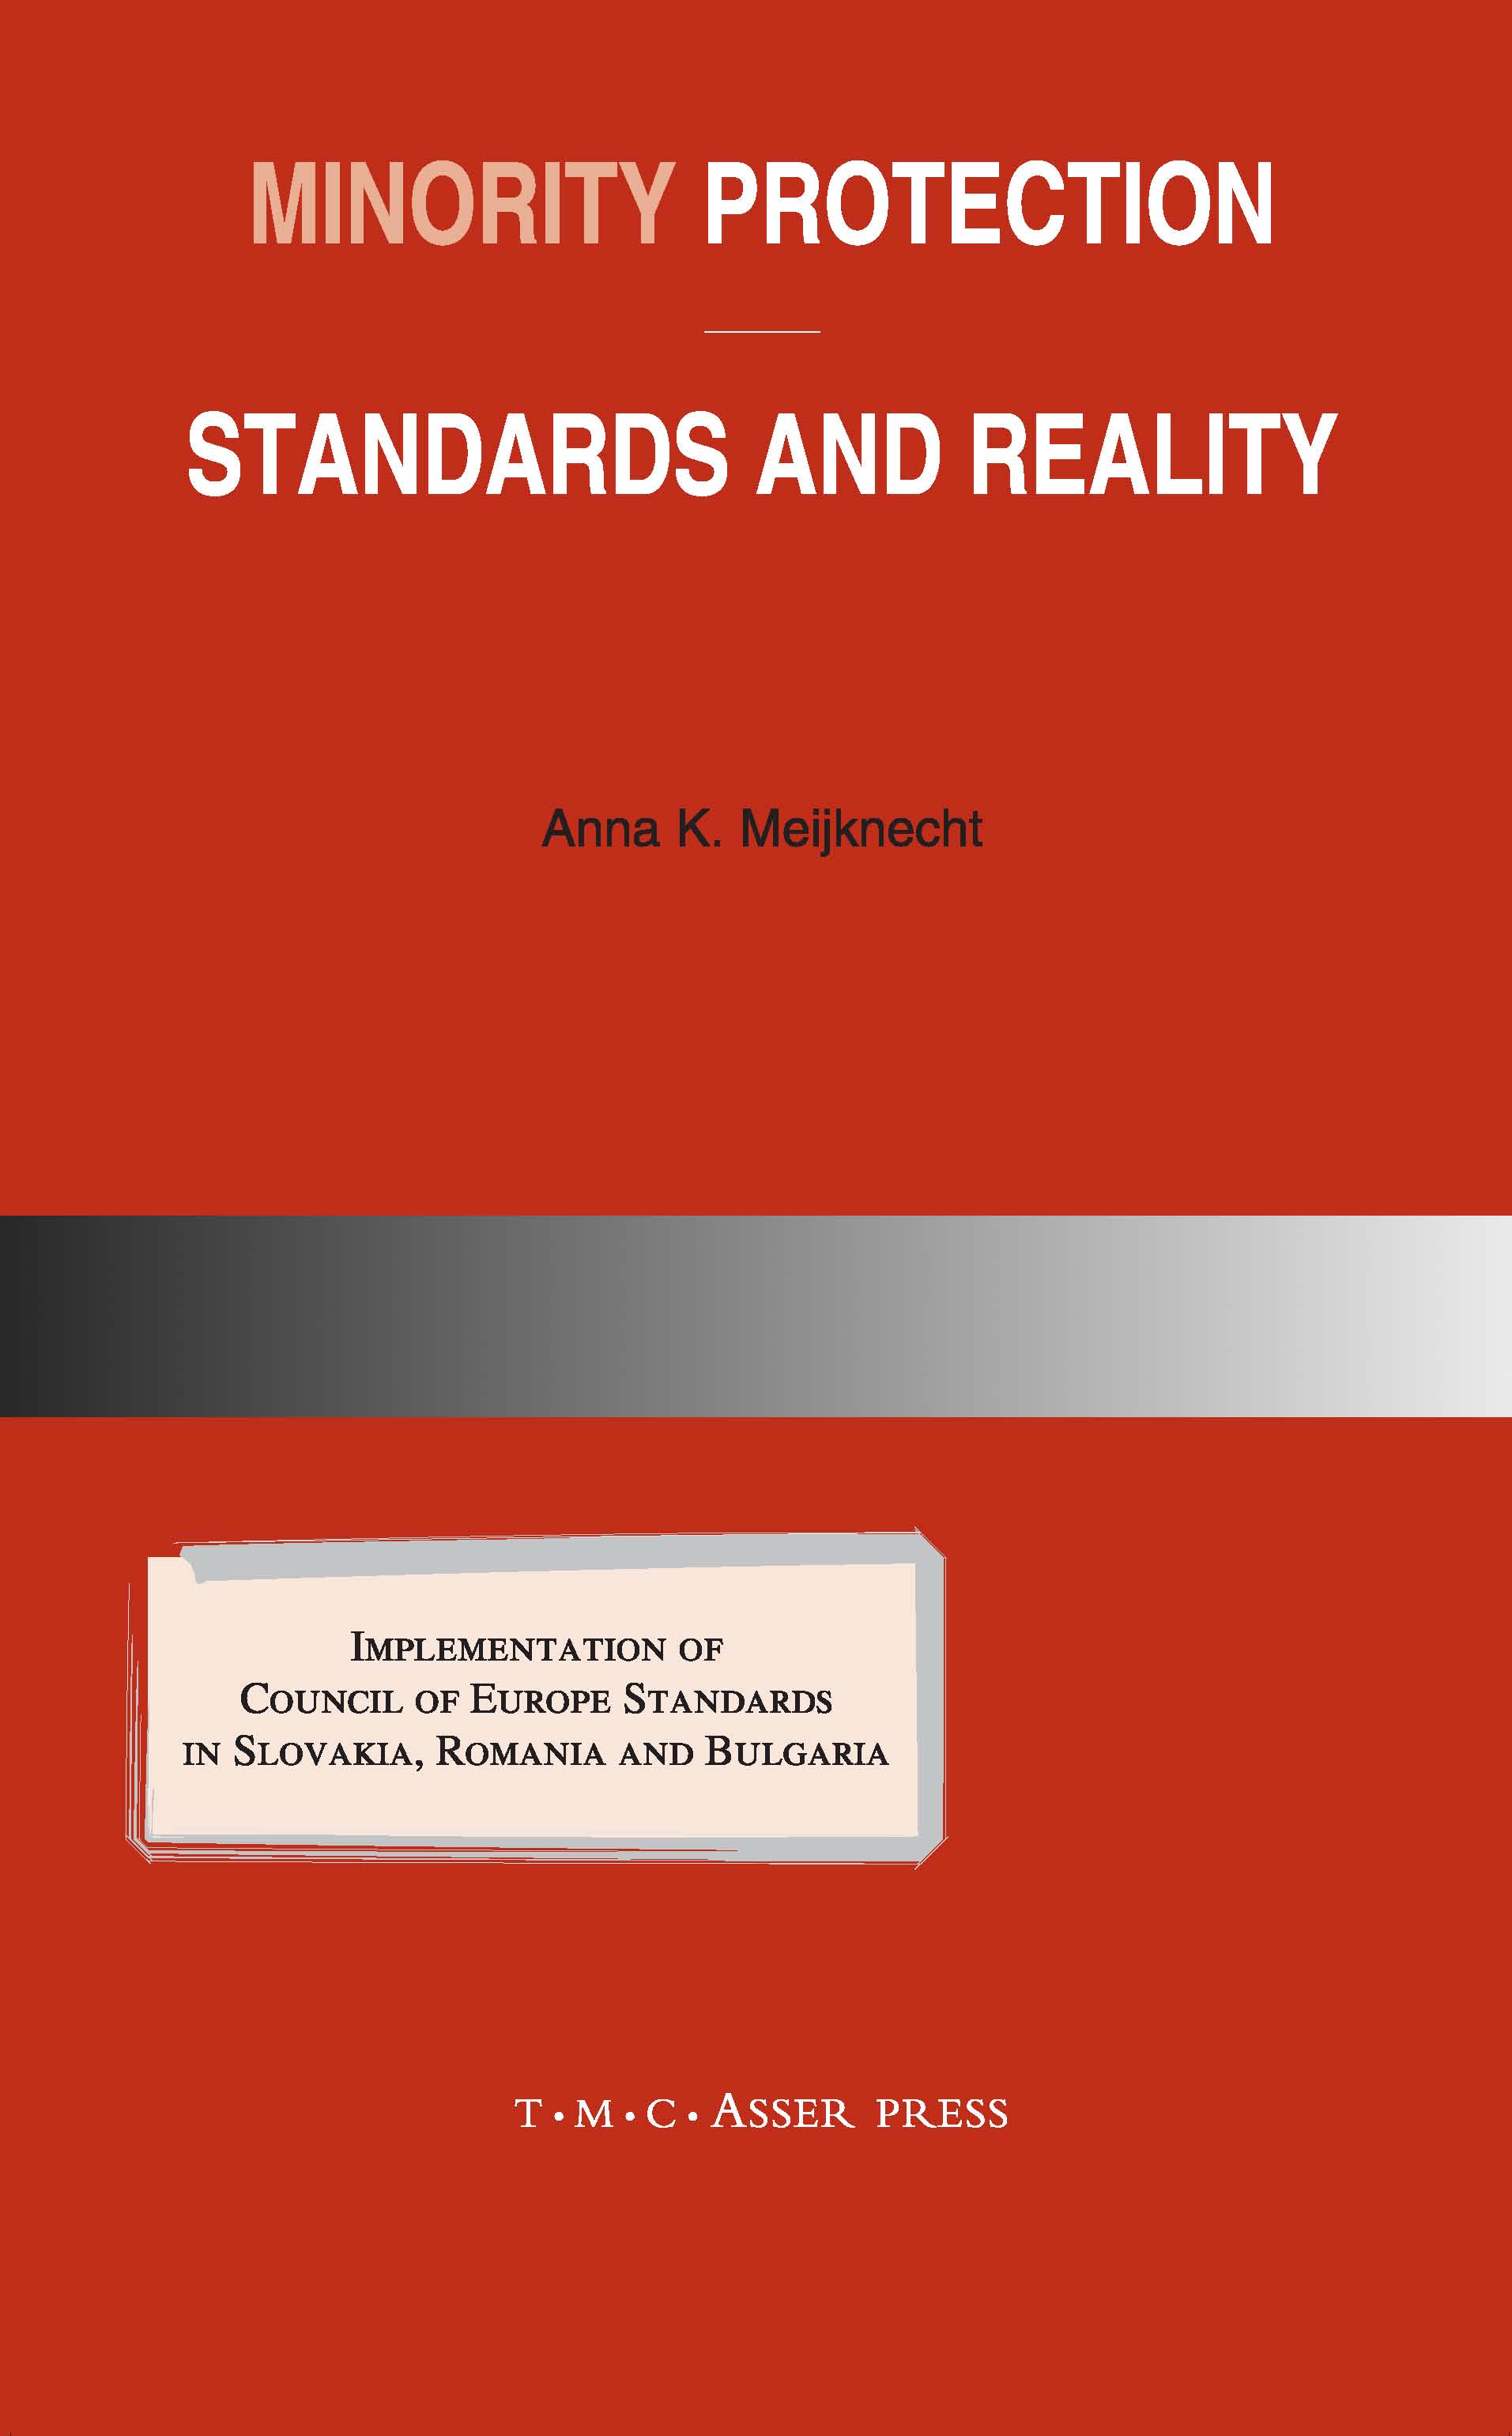 Minority Protection: Standards and Reality - Implementation of Council of Europe standards in Slovakia, Romania and Bulgaria